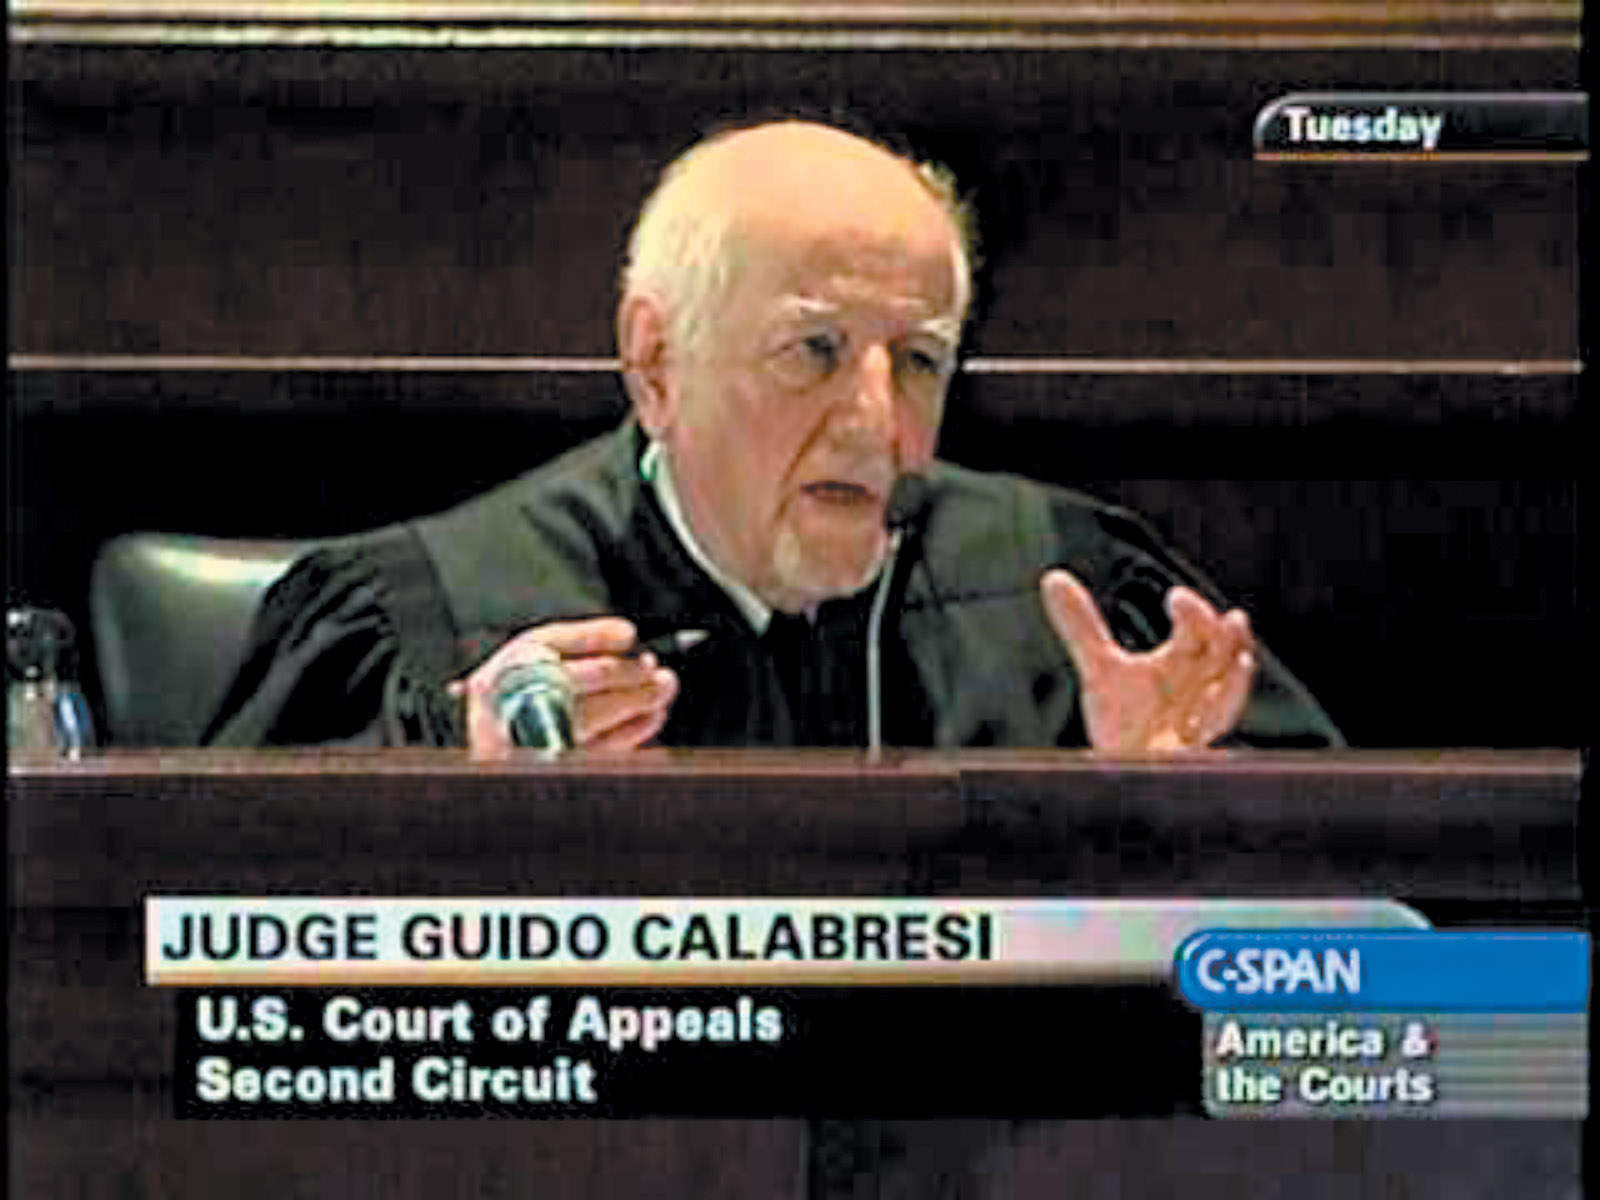 Judge Guido Calabresi during arguments in Arar v. Ashcroft, New York City, December 2008. The court ruled that Maher Arar—a Canadian citizen who was wrongly deported by the US to Syria, where he was held for a year and subjected to torture—had no right to sue US government officials. In his dissent, Calabresi argued that ‘when the history of this distinguished court is written, today’s majority opinion will be viewed with dismay.’